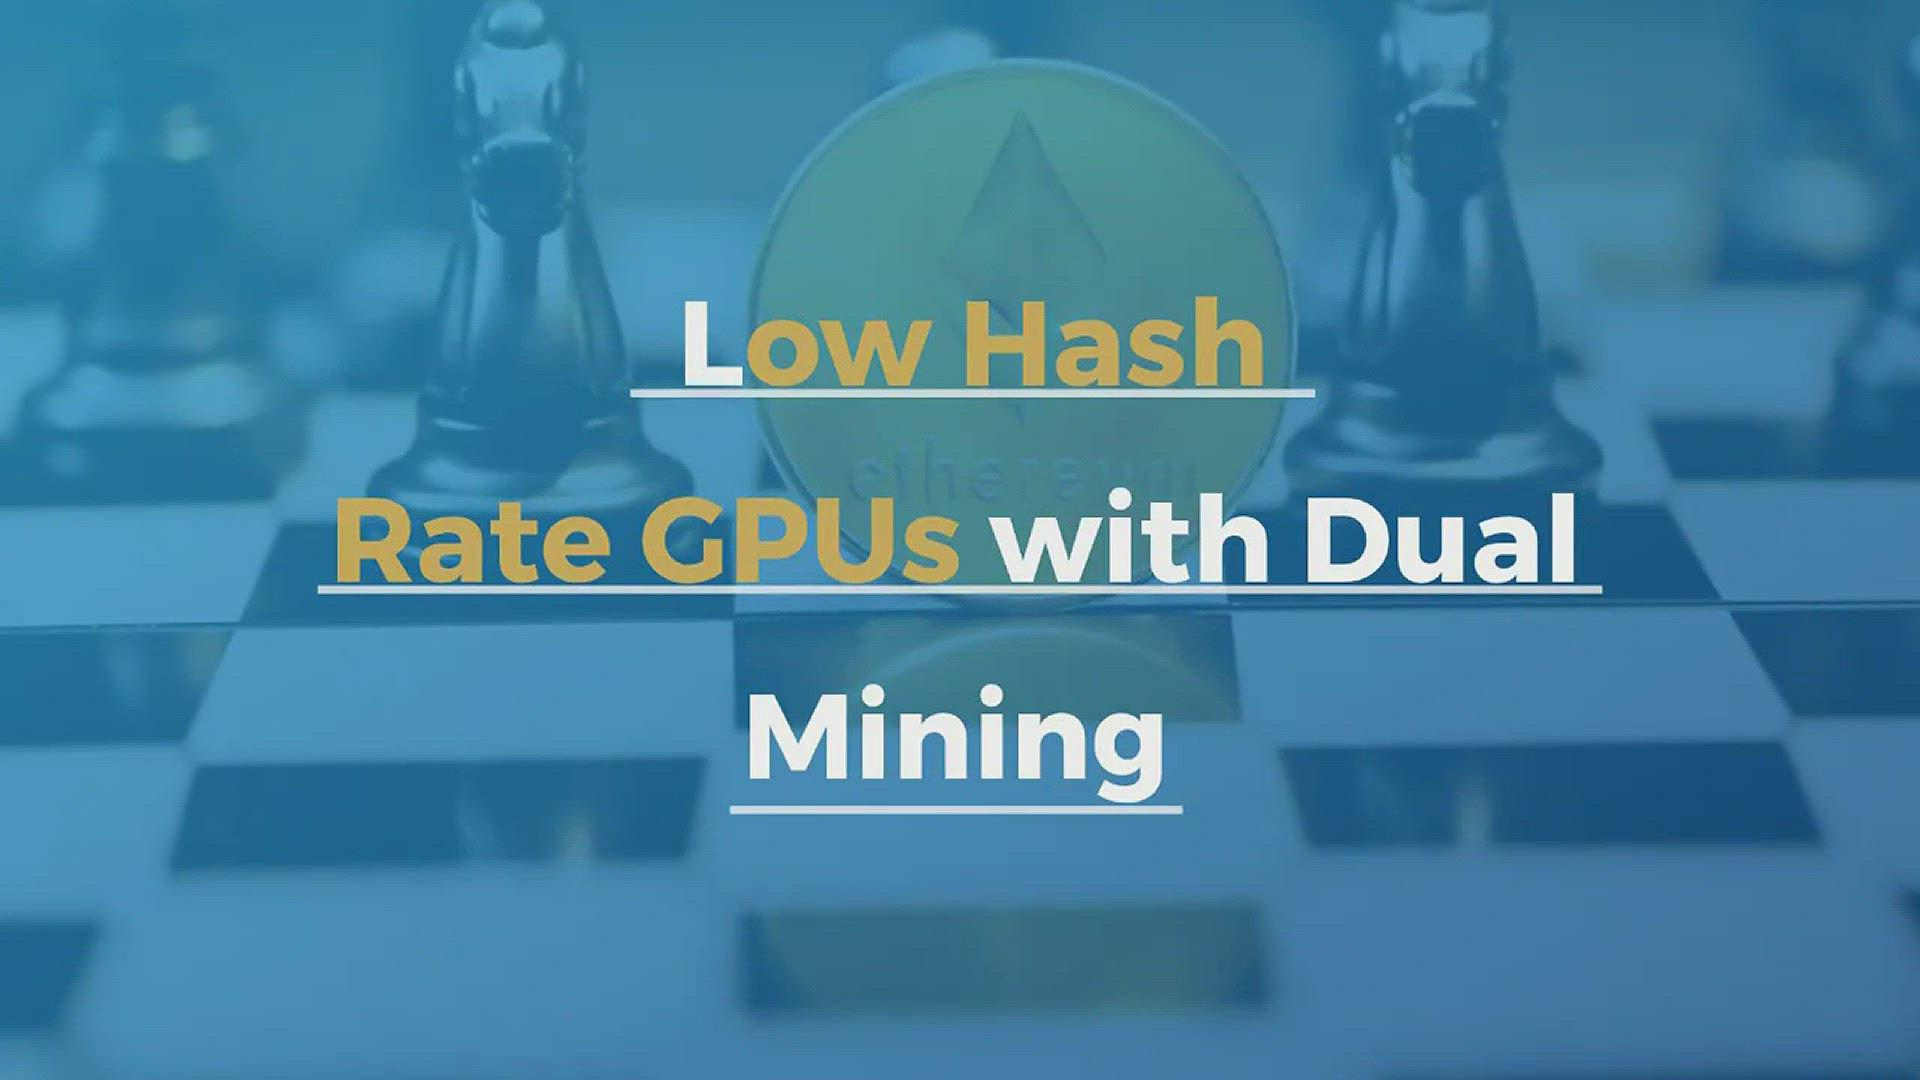 'Video thumbnail for Low Hash Rate GPUs with Dual Mining'